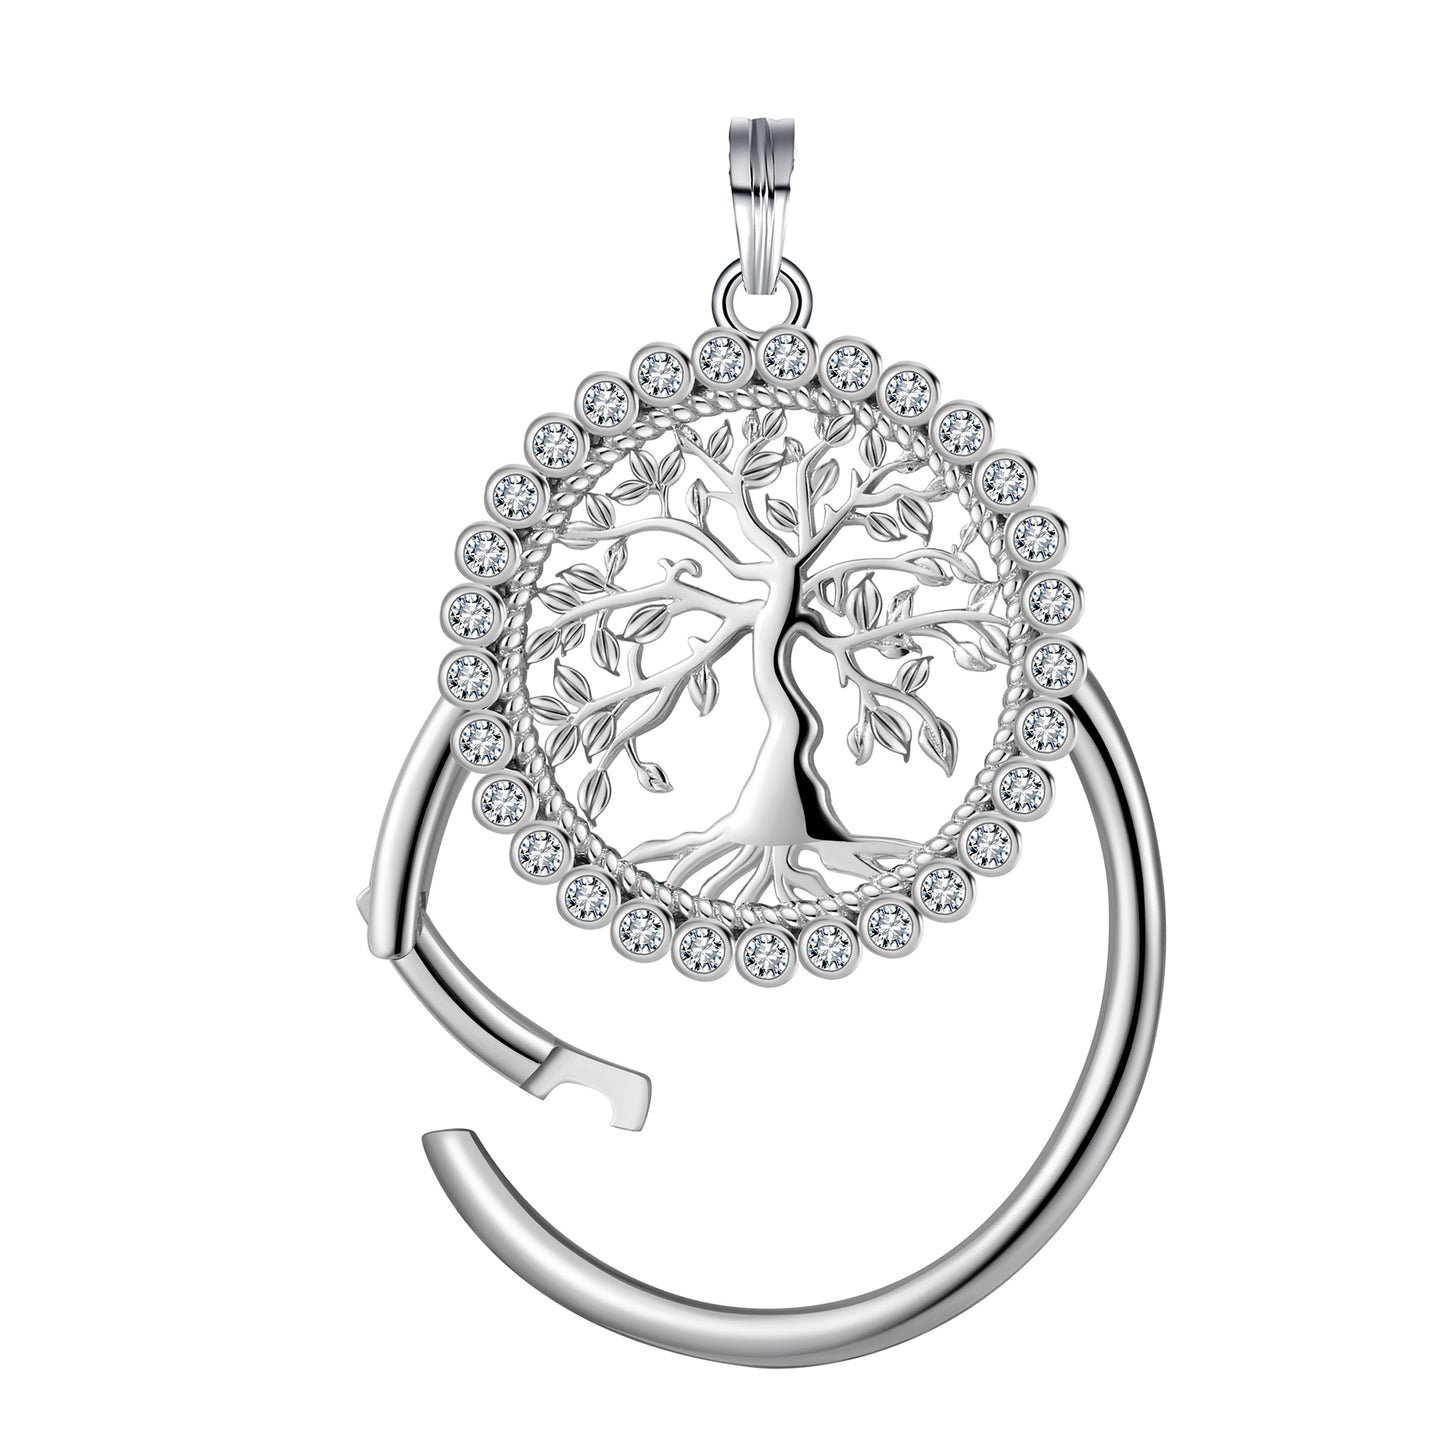 Family Tree Charm Holder for Necklace by Ginger Lyne Sterling Silver Gift for Grandmother or Mother - Family Tree-CH